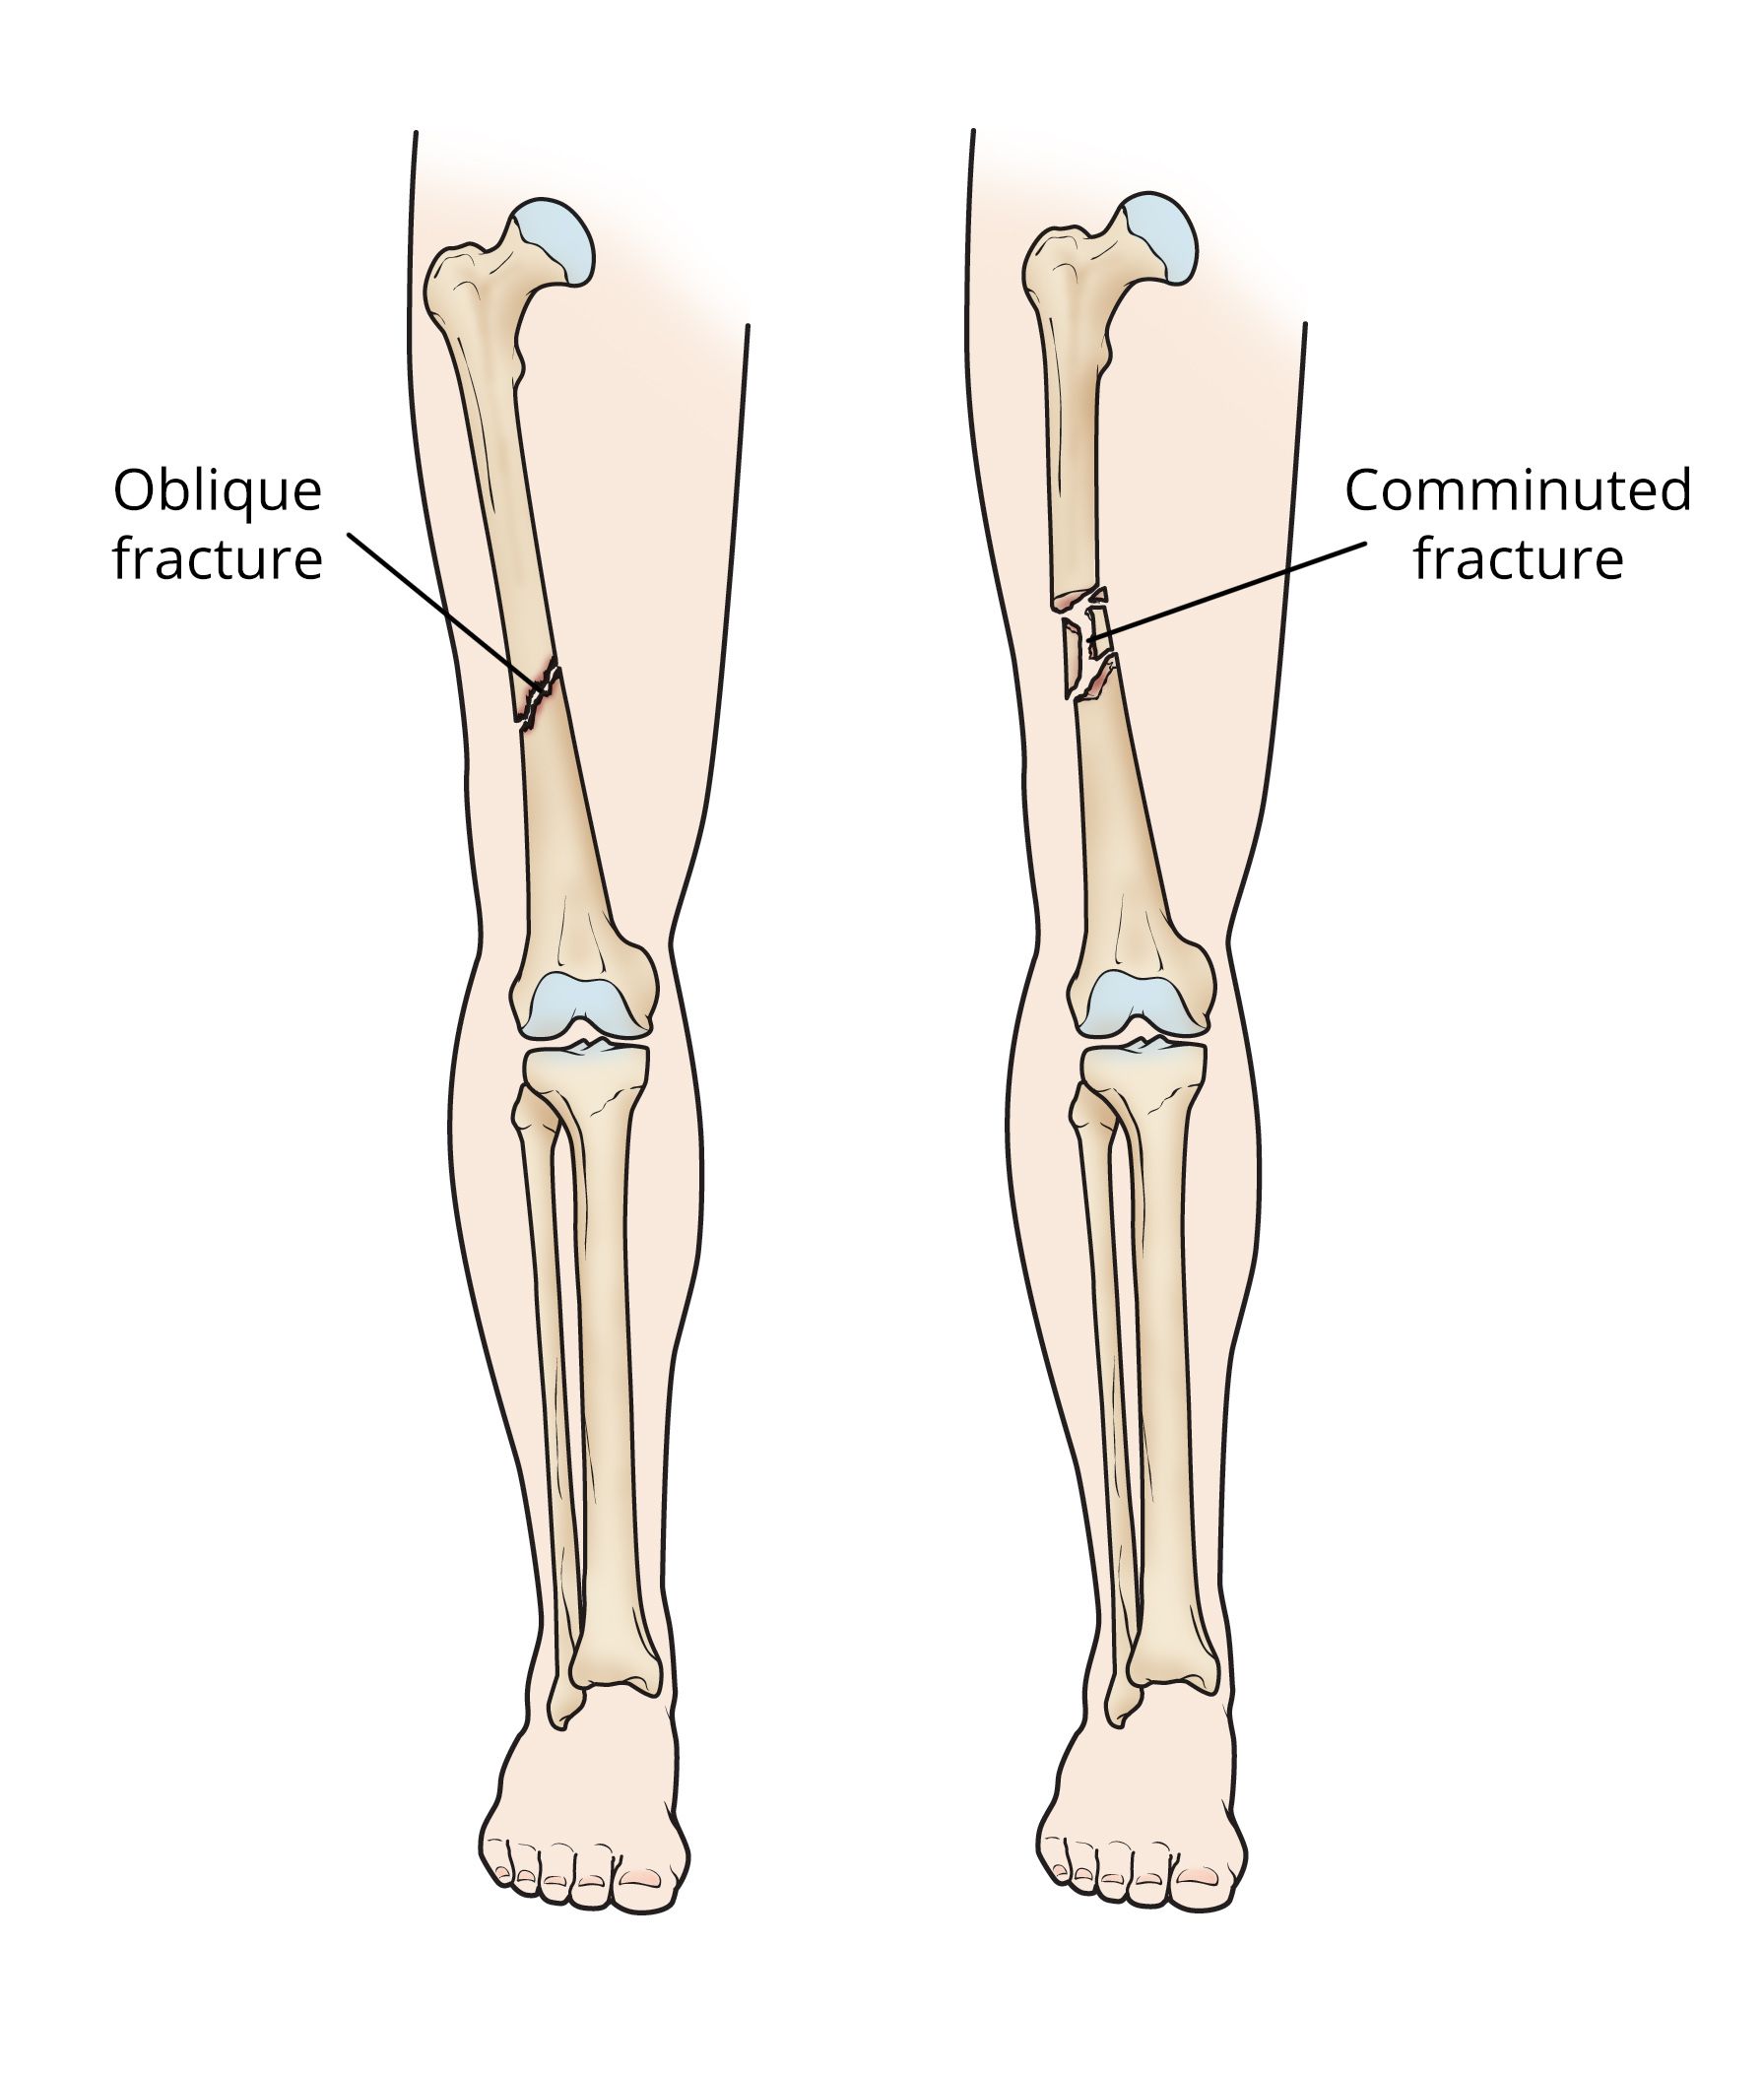 Oblique and comminuted femoral shaft fractures